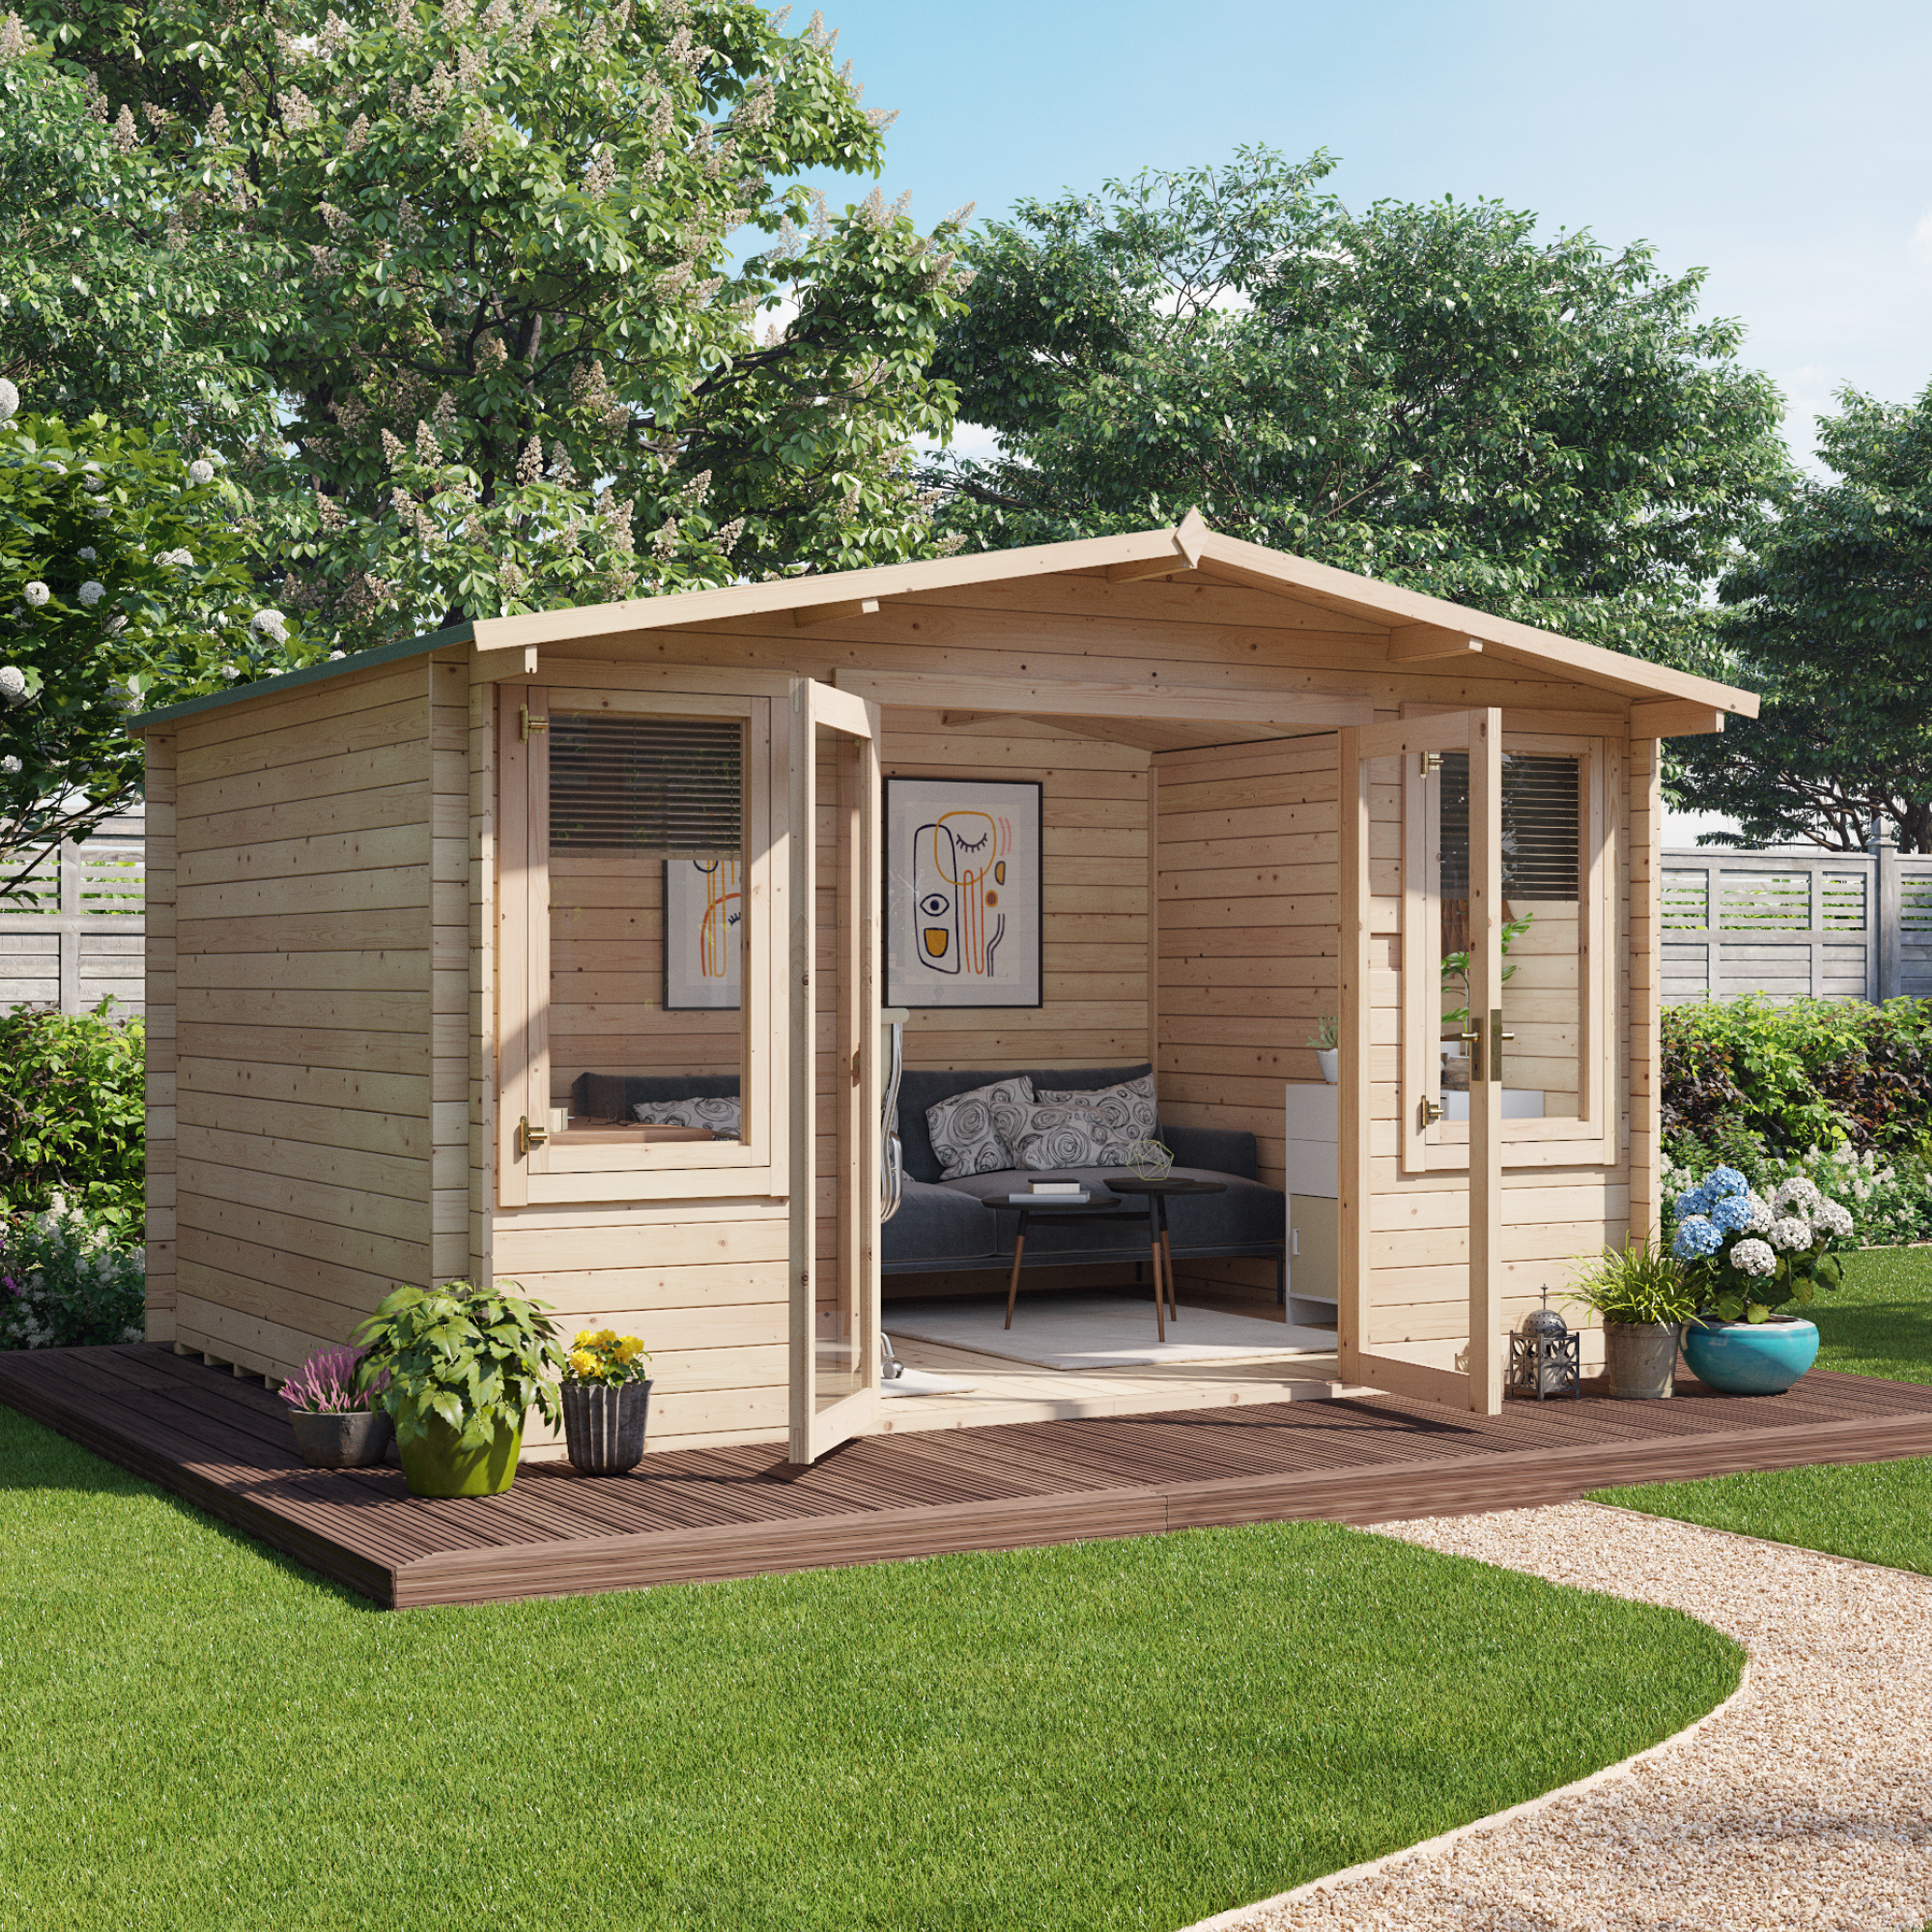 4 x 3 Log Cabin Summer House - BillyOh Winchester Log Cabin - 28mm Thickness Wooden Log Cabin Summerhouses - 4m x 3m Traditional Alpine Style Cabin